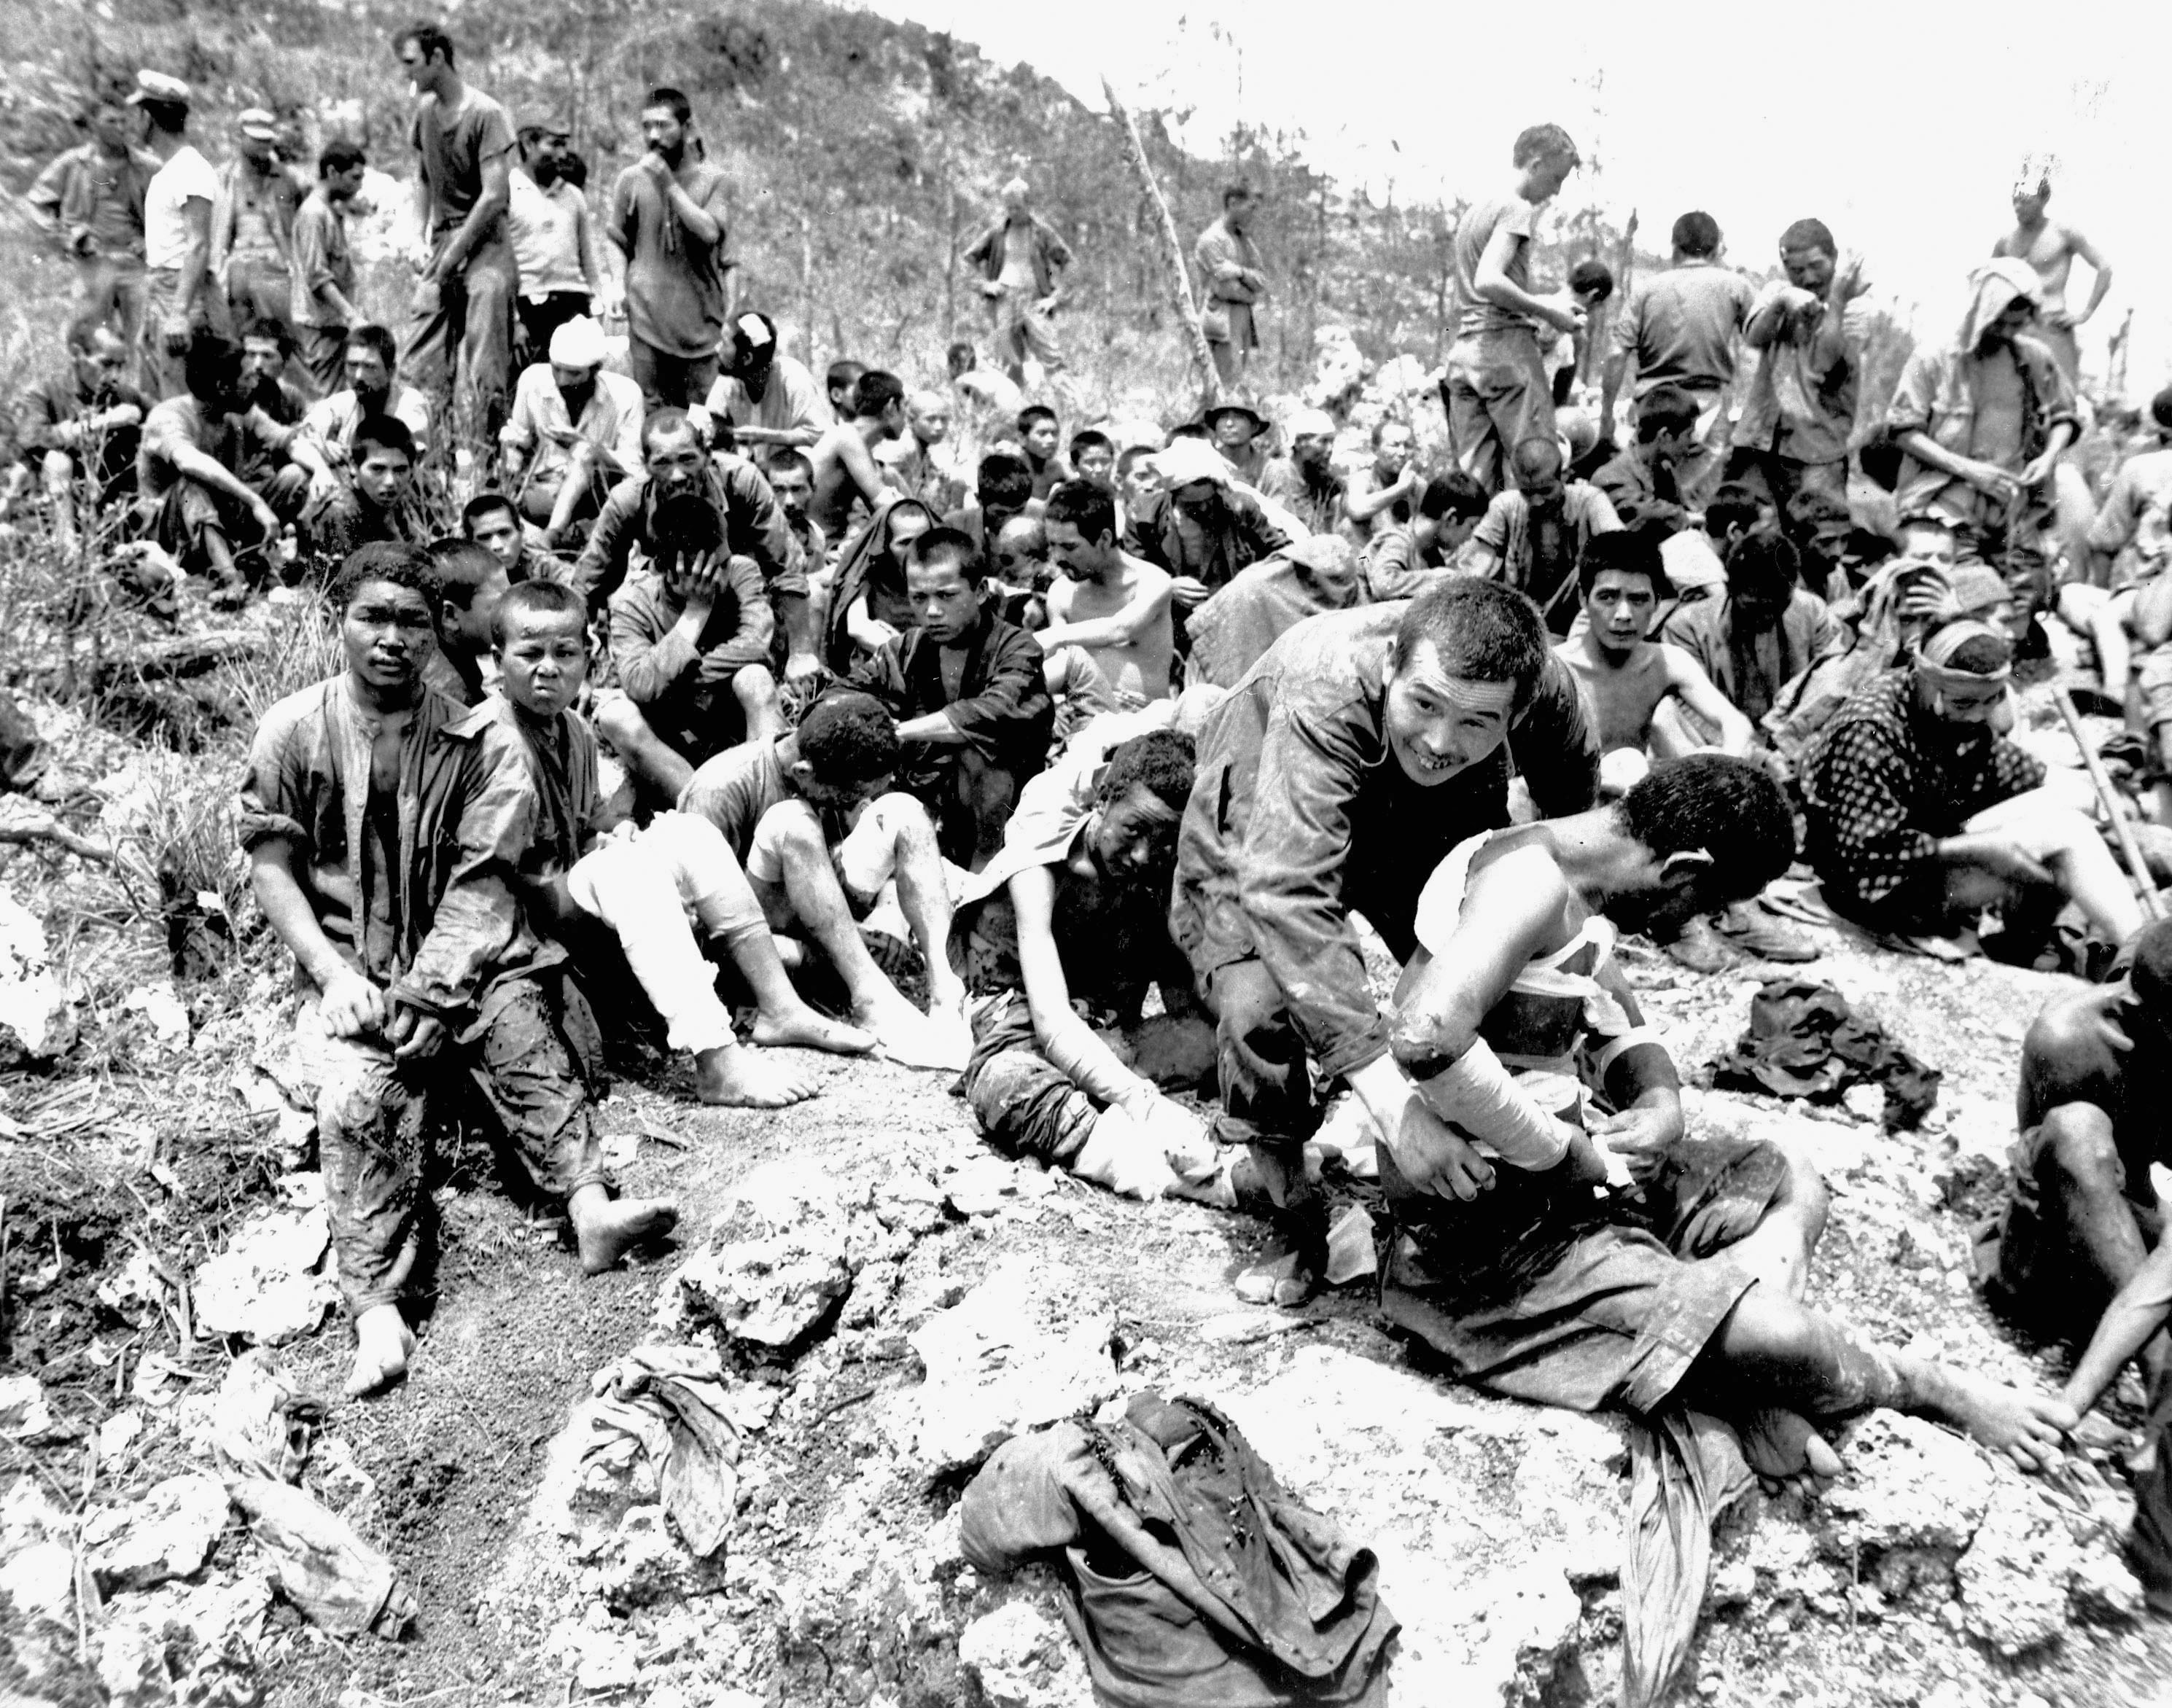 Okinawa residents, many of them wounded, surrender in June 1945 in this image taken by the U.S. military. | COURTESY OF OKINAWA PREFECTURAL ARCHIVES / KYODO